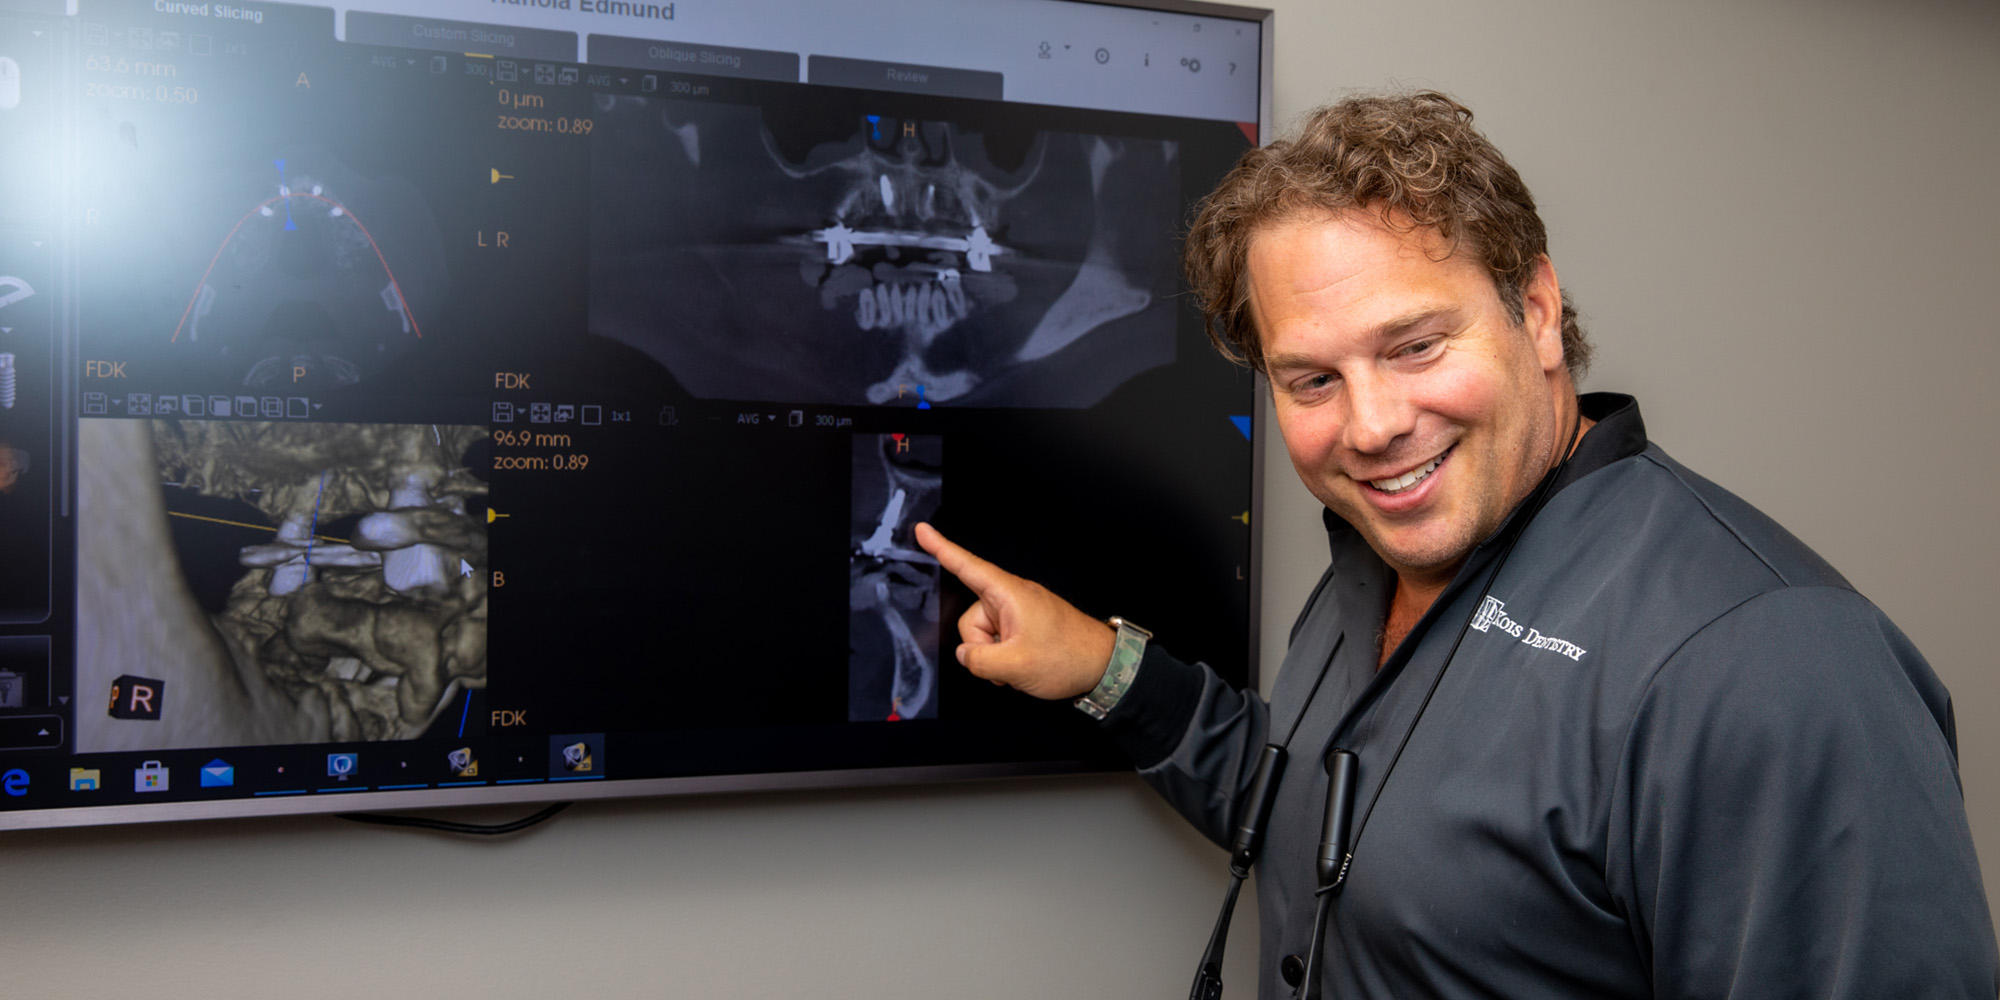 Prosthodontist Dr. Dean Kois pointing at 3D images of a patients jaw on a monitor.